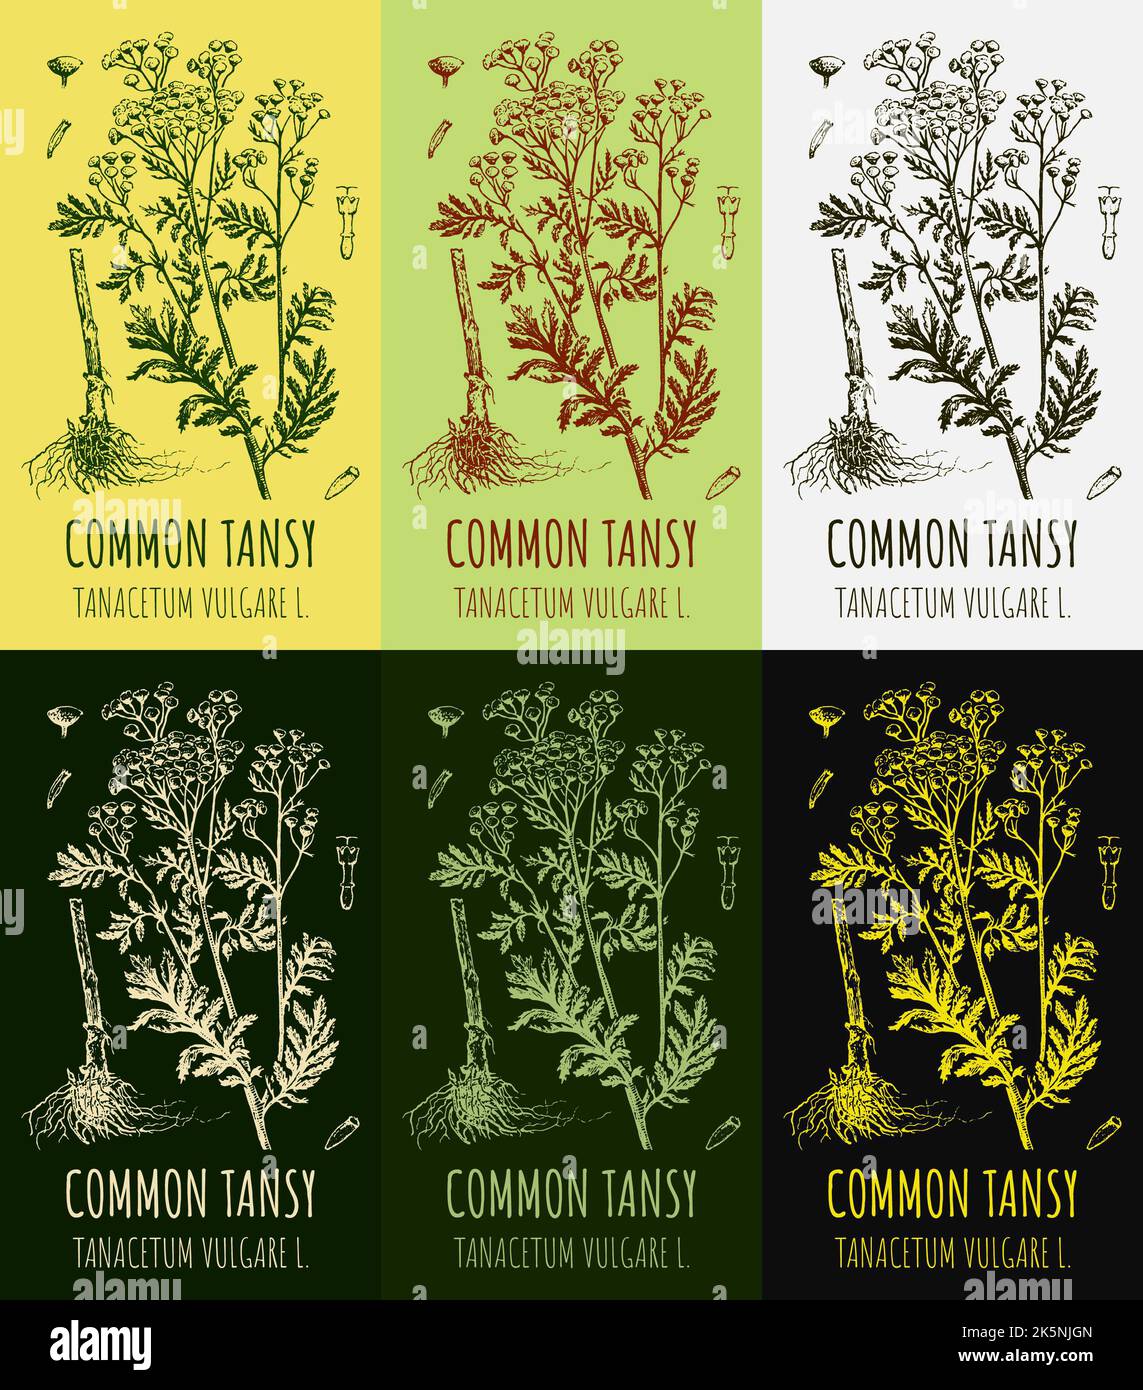 Set of vector drawings of COMMON TANSY in different colors. Hand drawn illustration. Latin name TANACETUM VULGARE L. Stock Photo